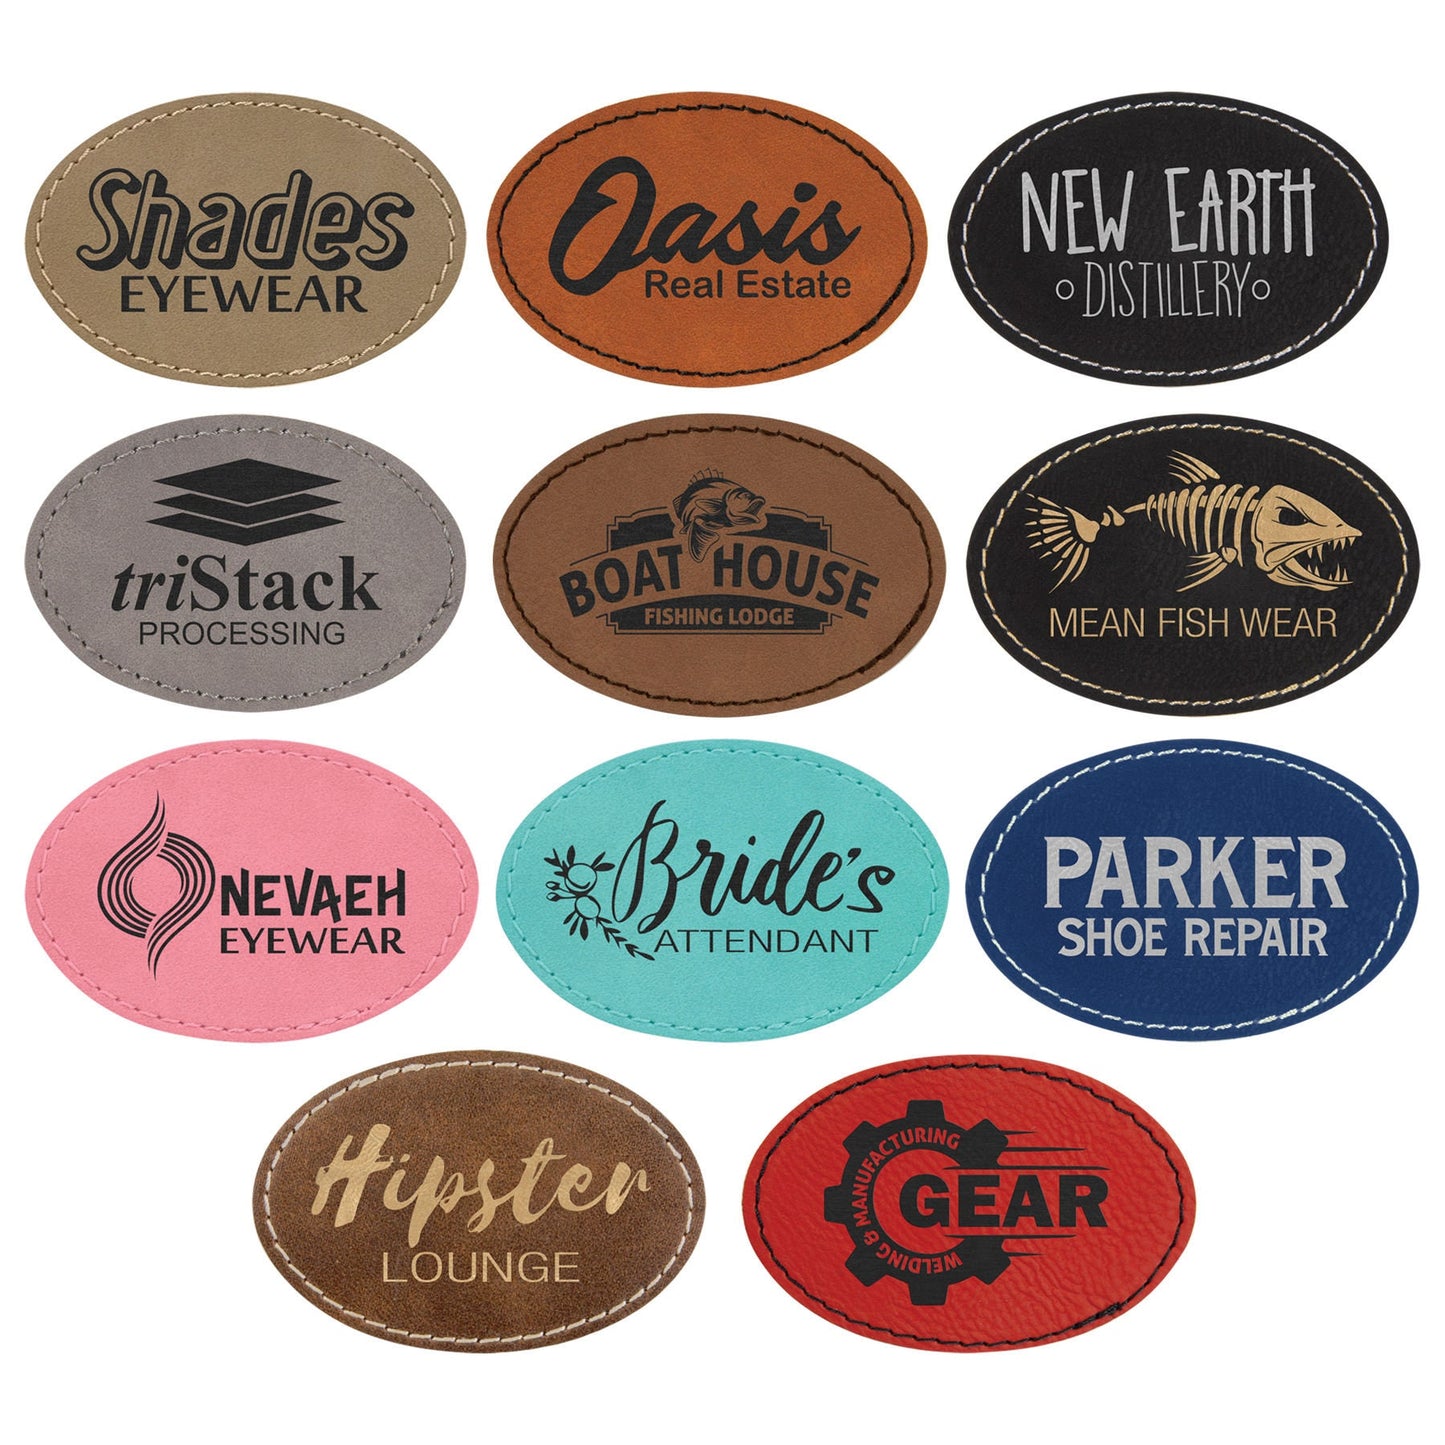 3x2 Blank Leatherette Oval Patches w/ Adhesive Backing – Bunkers